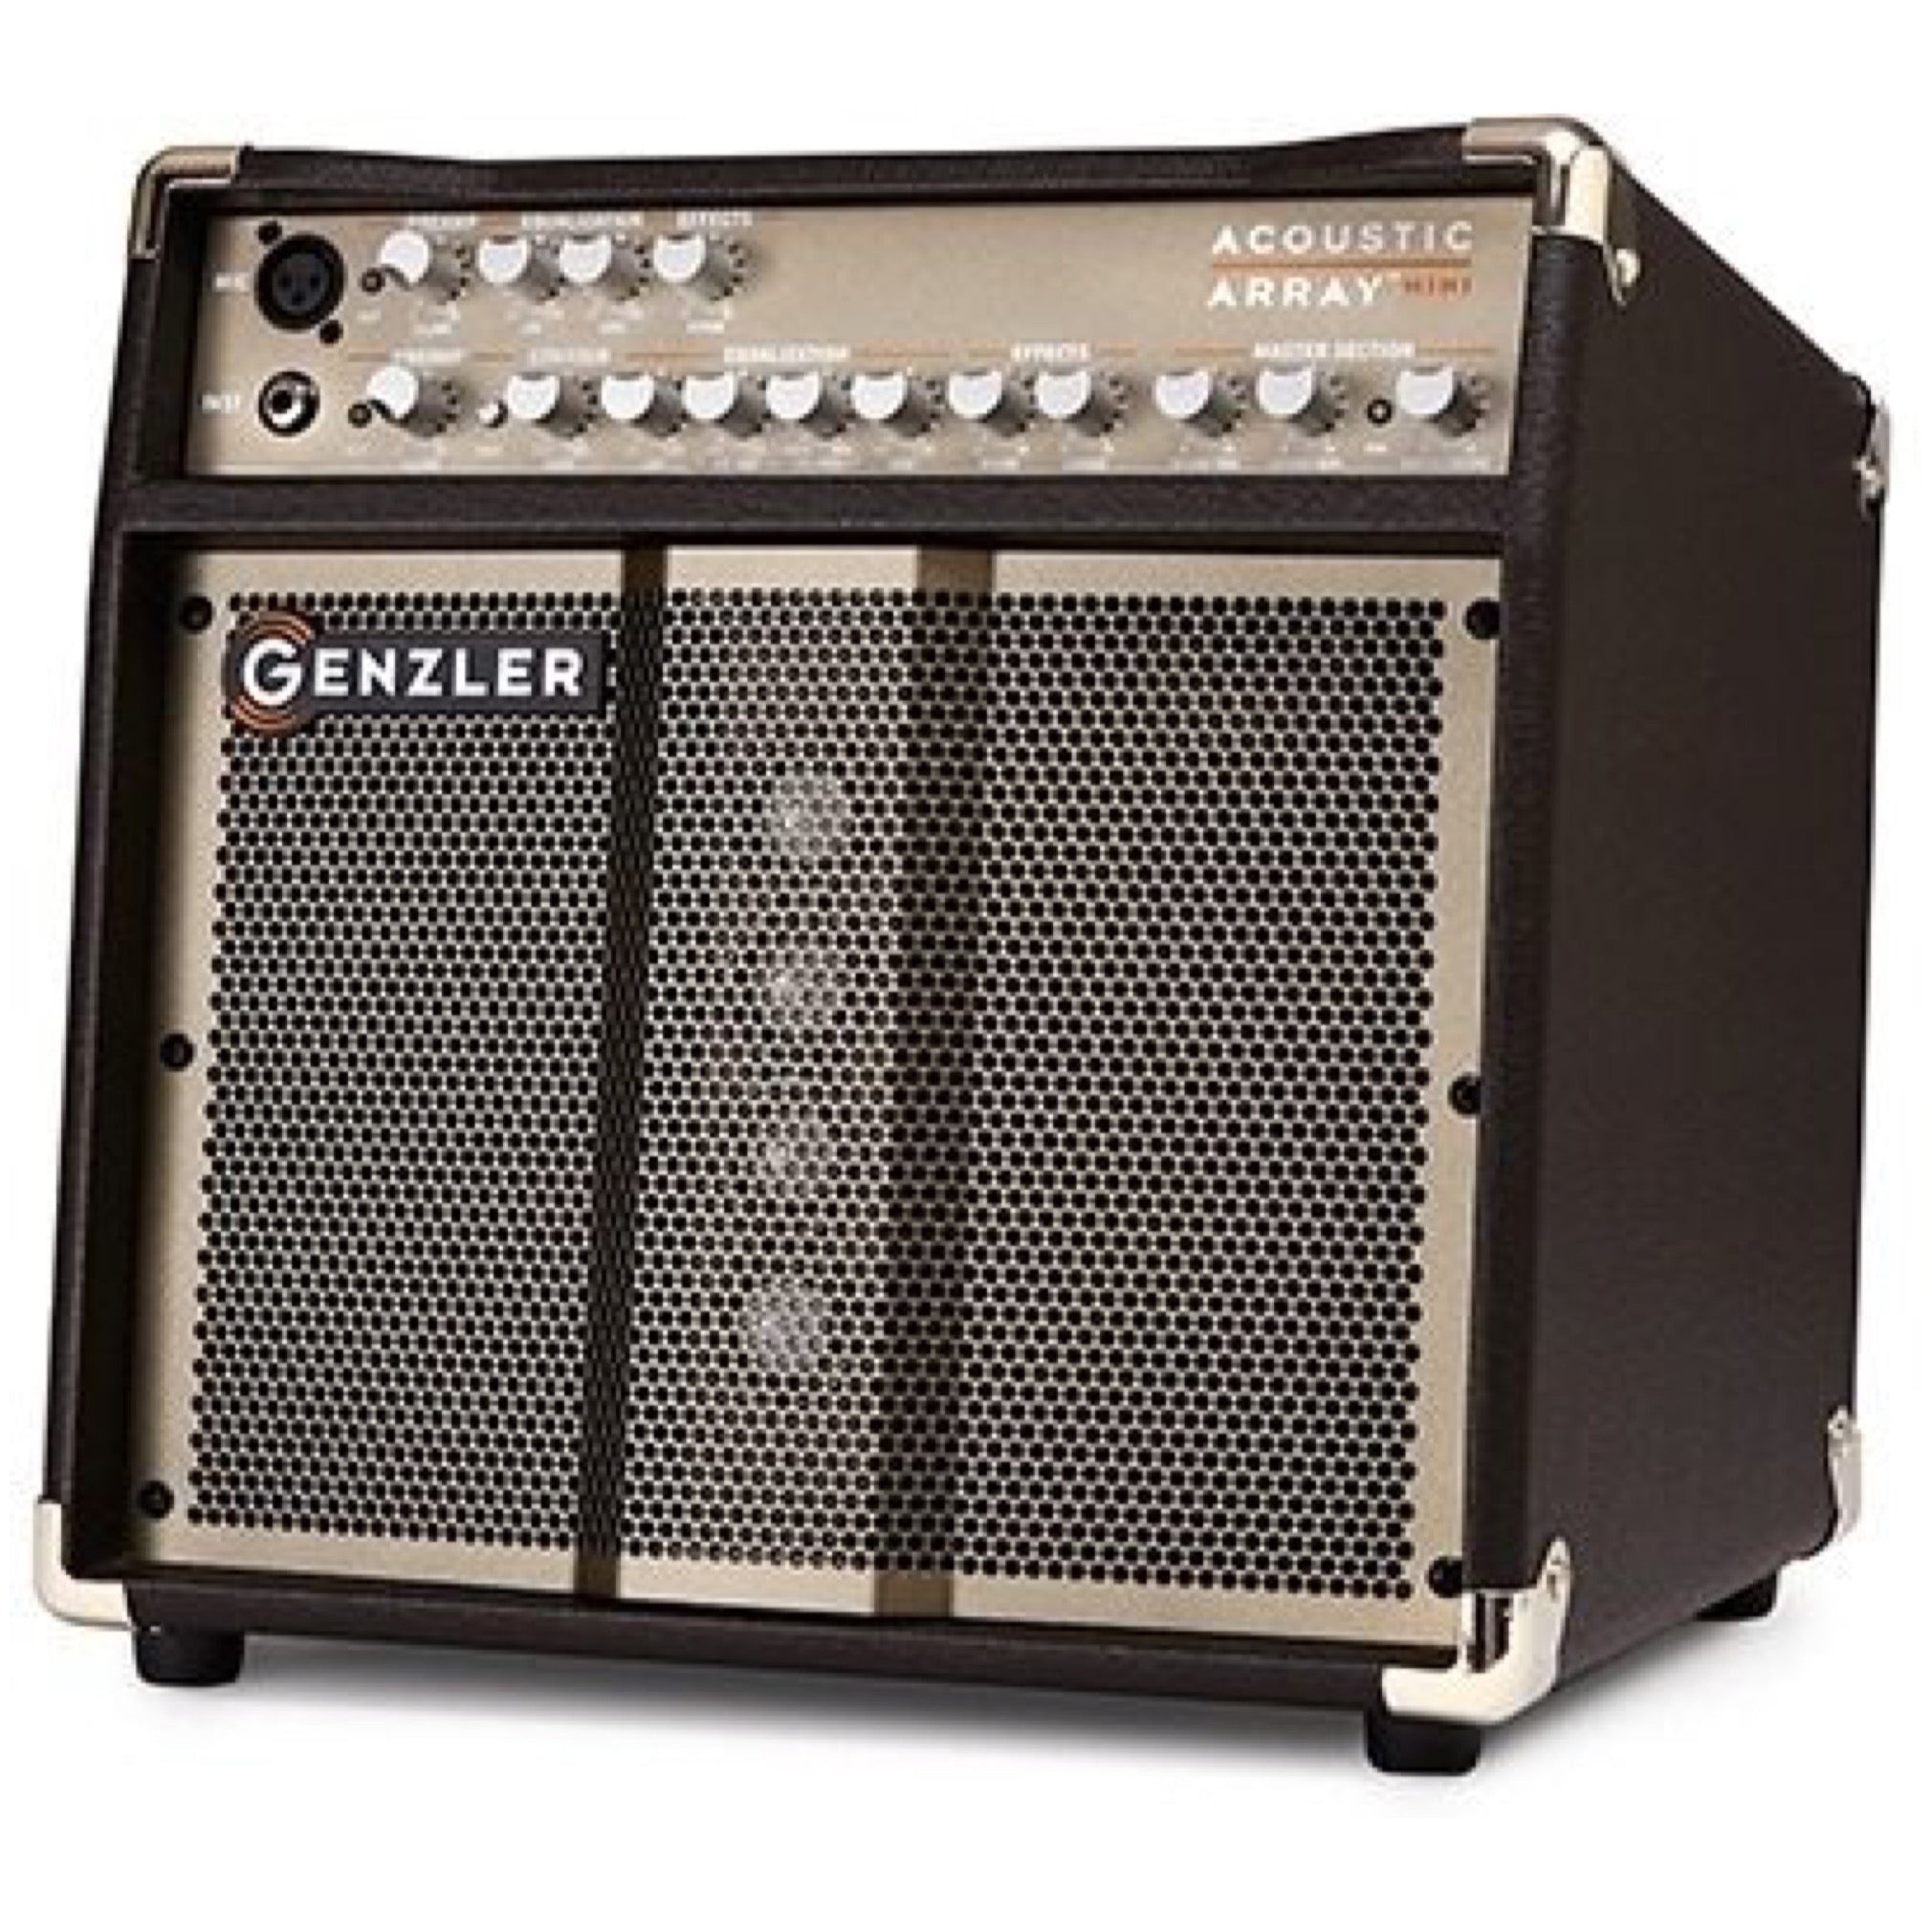 Genzler Acoustic Array MINI Acoustic Guitar Amplifier (100 Watts, 1x8 –  Same Day Music